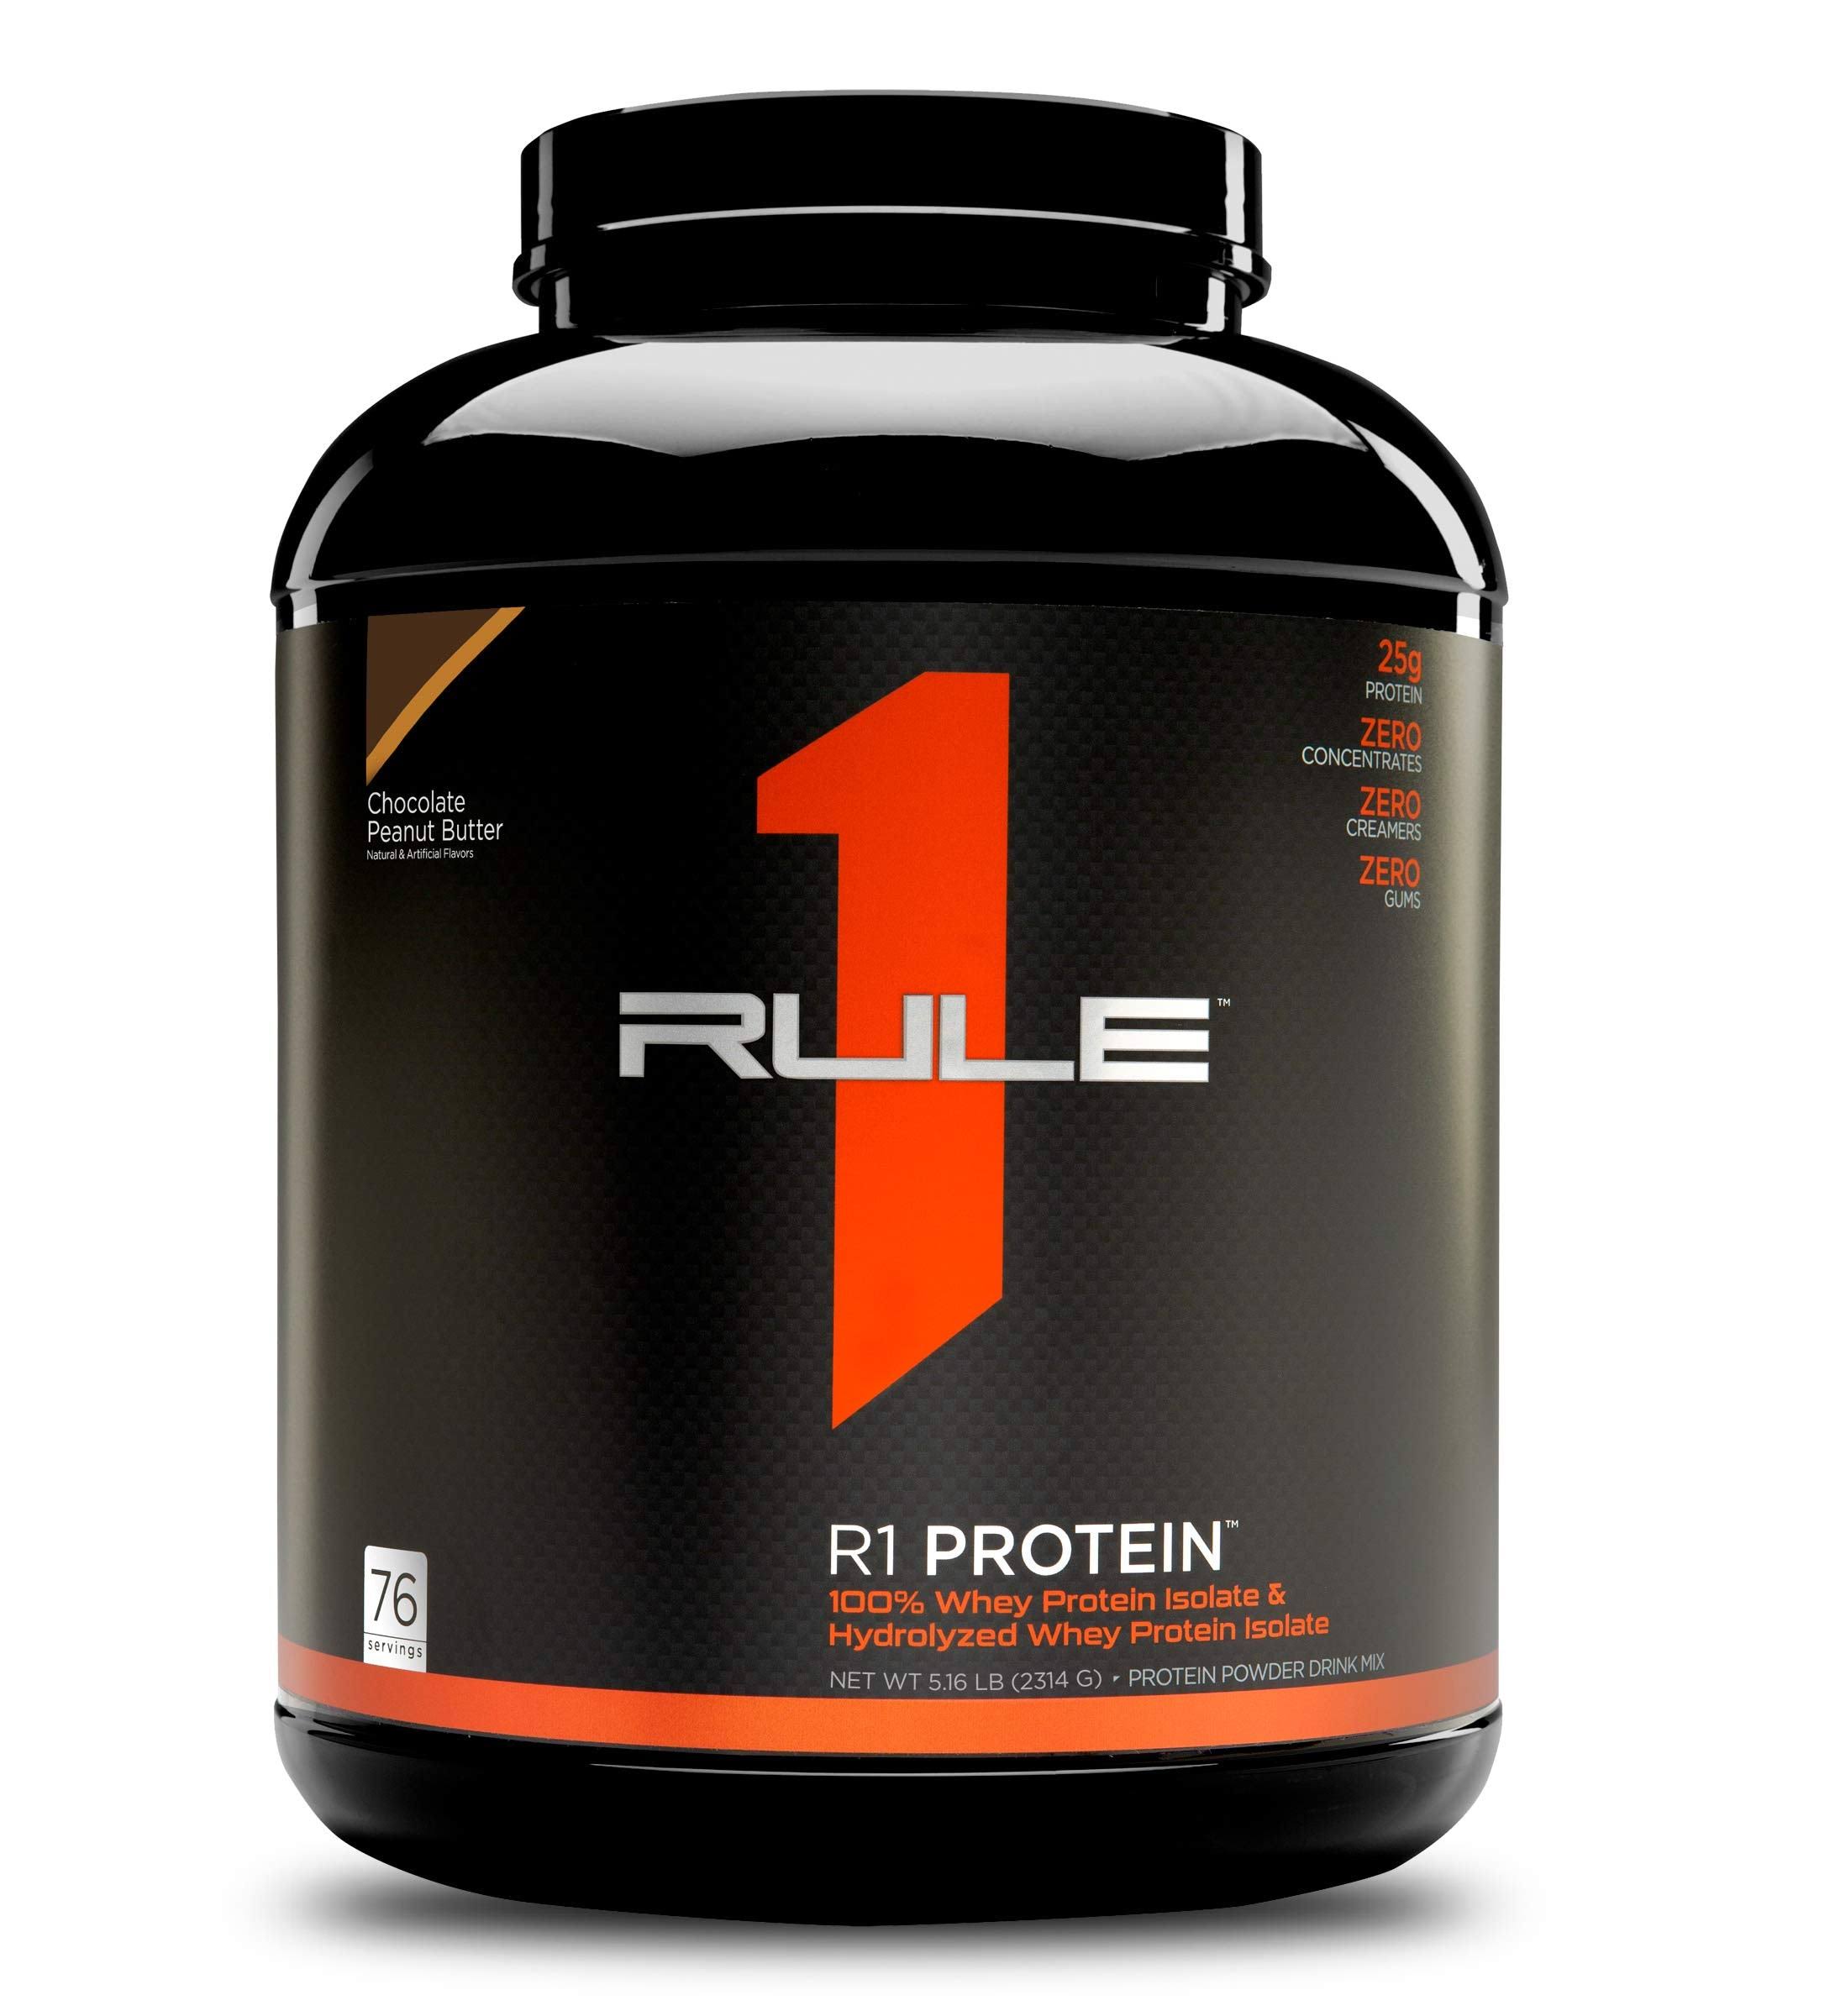 R1 Protein 5lbs / Chocolate Peanut Butter